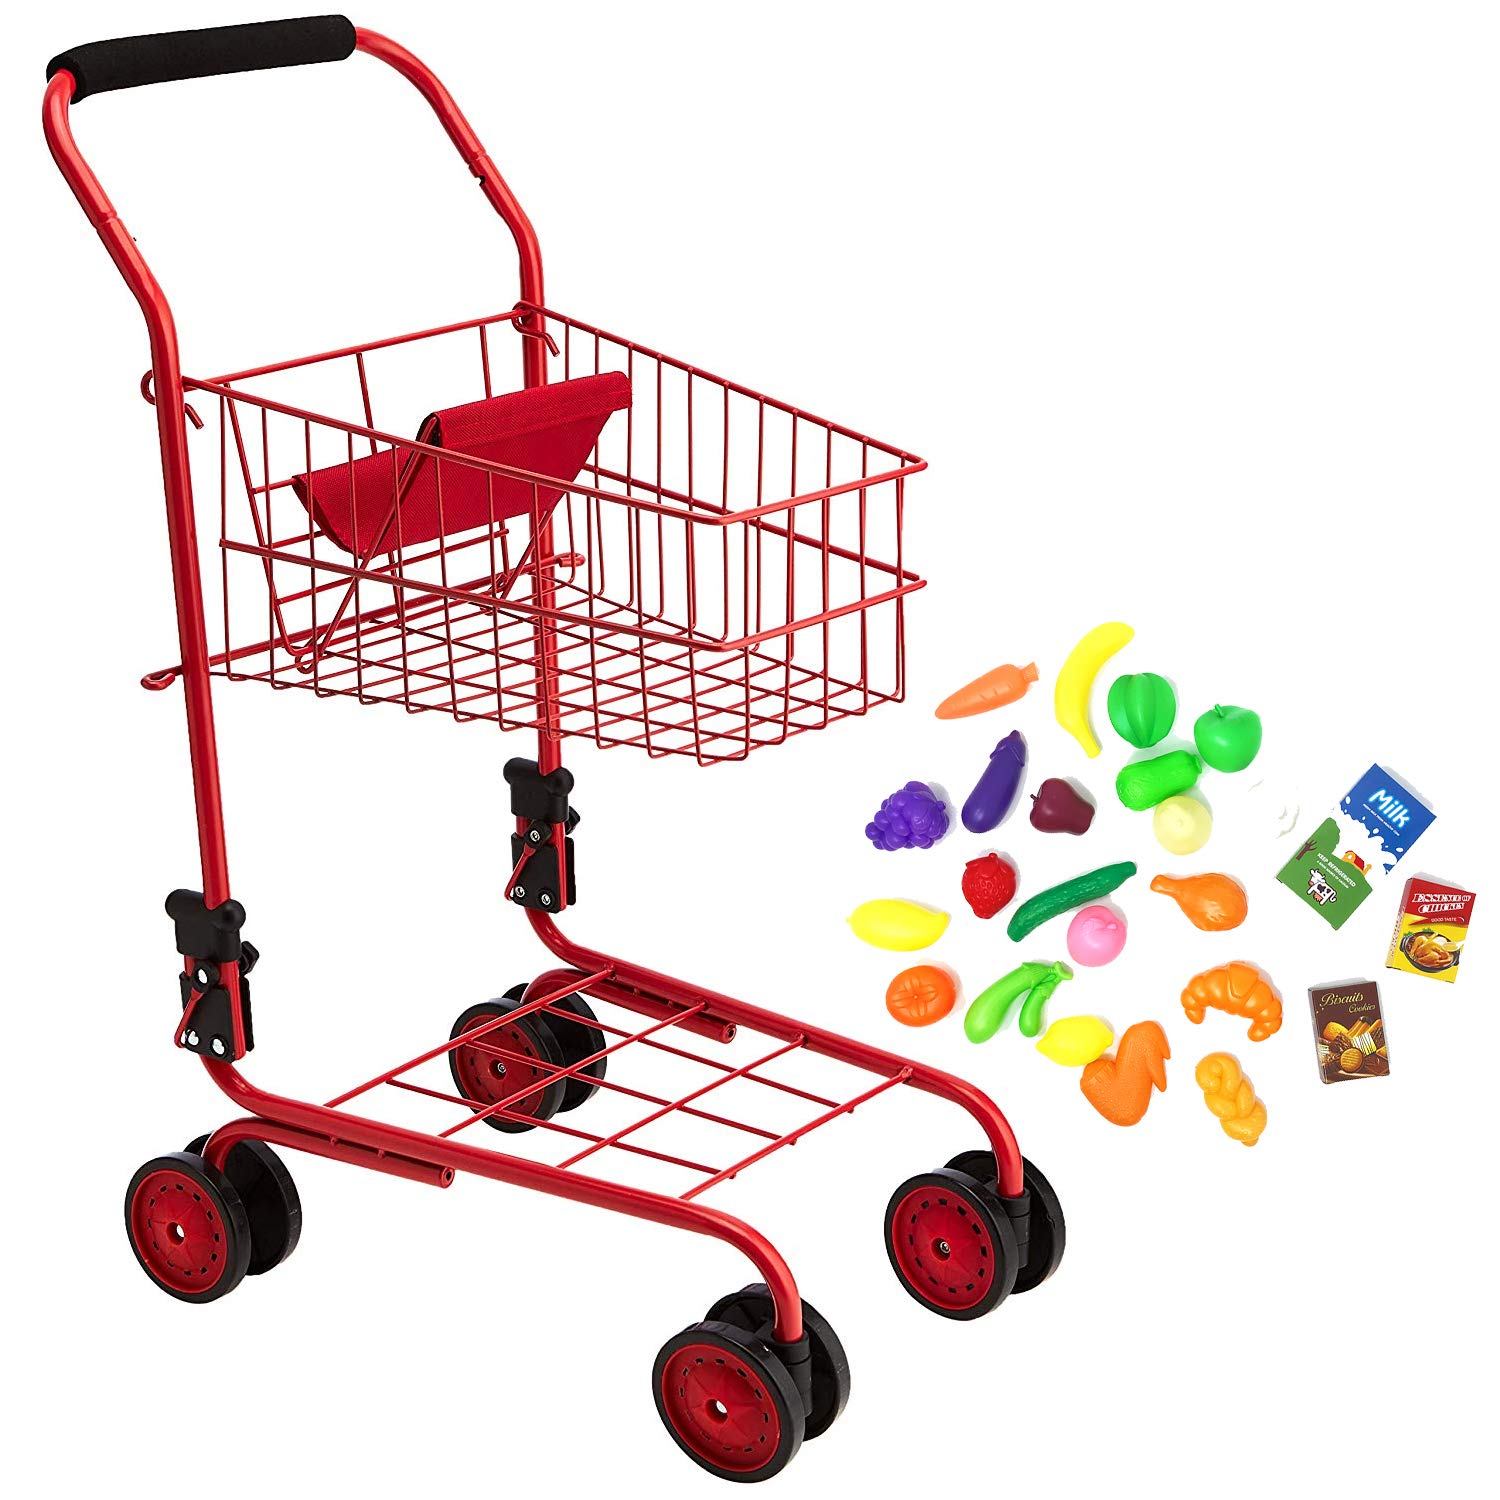 The New York Doll Collection Toy Shopping Cart for Kids and Toddler - Includes Food - Folds for Easy Storage - with Sturdy Metal